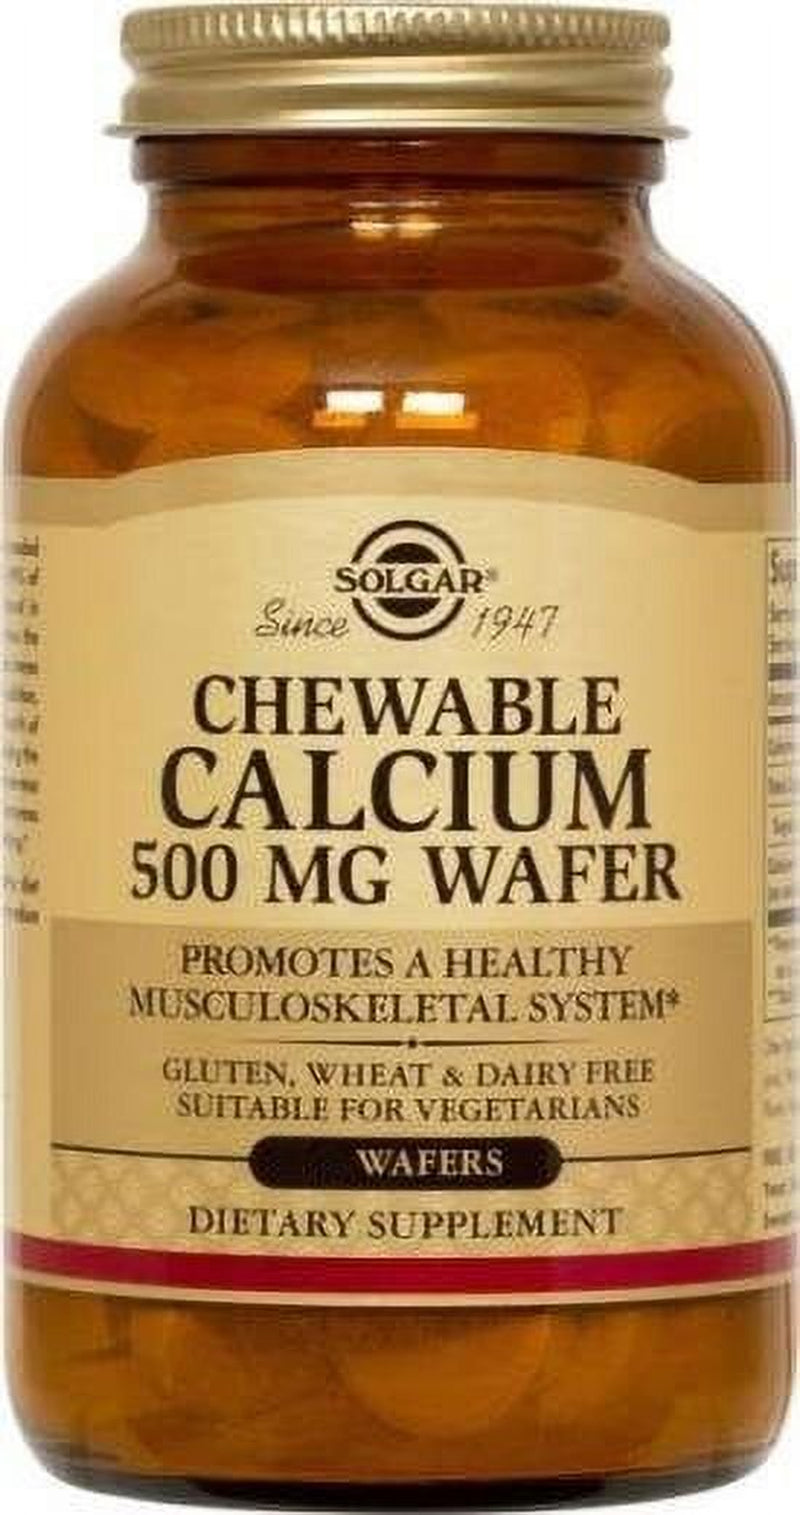 Chewable Calcium 500 Mg - 120 Wafers